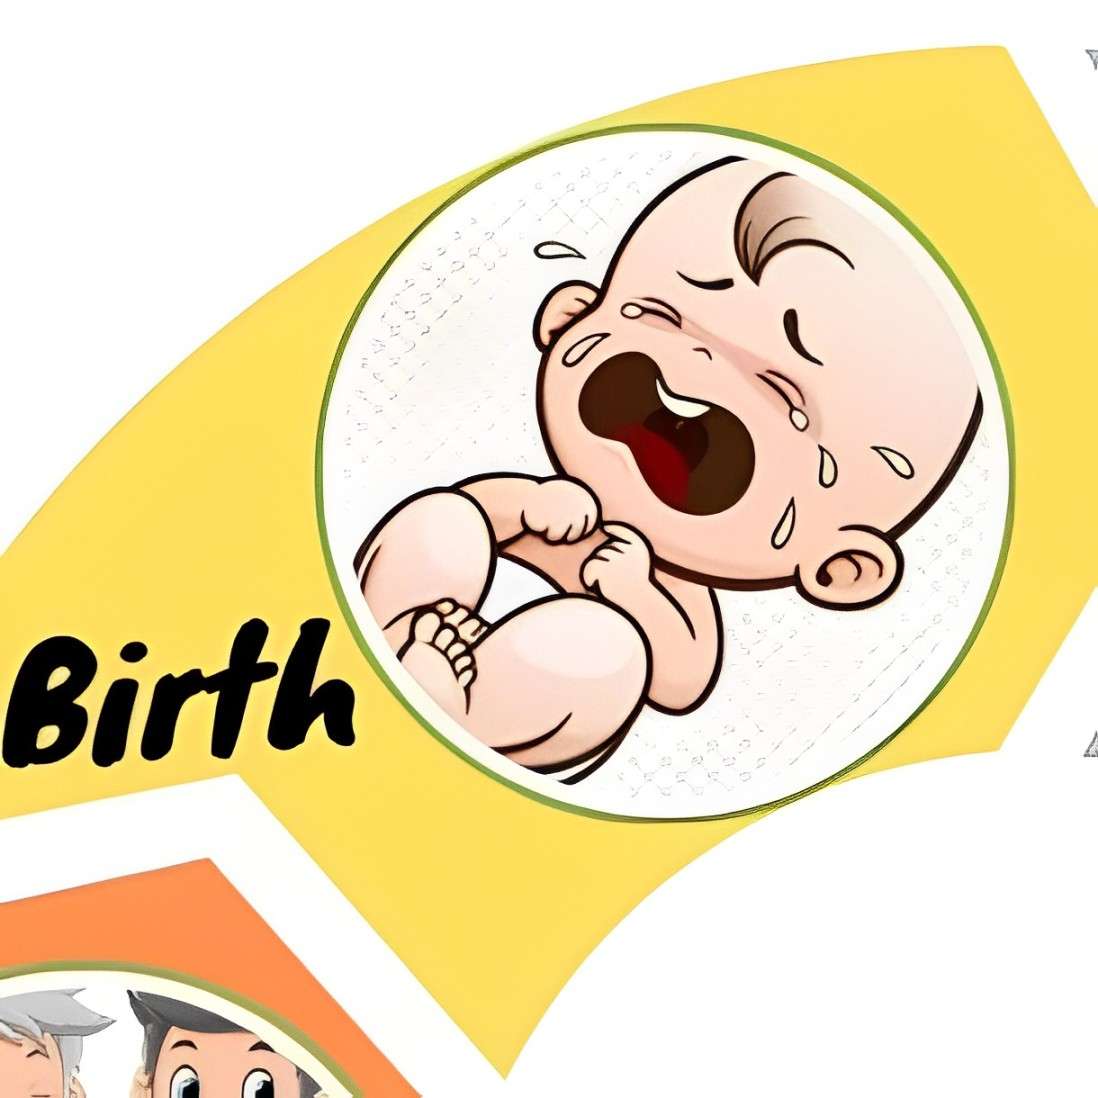 Birth alCOF puzzle online from photo